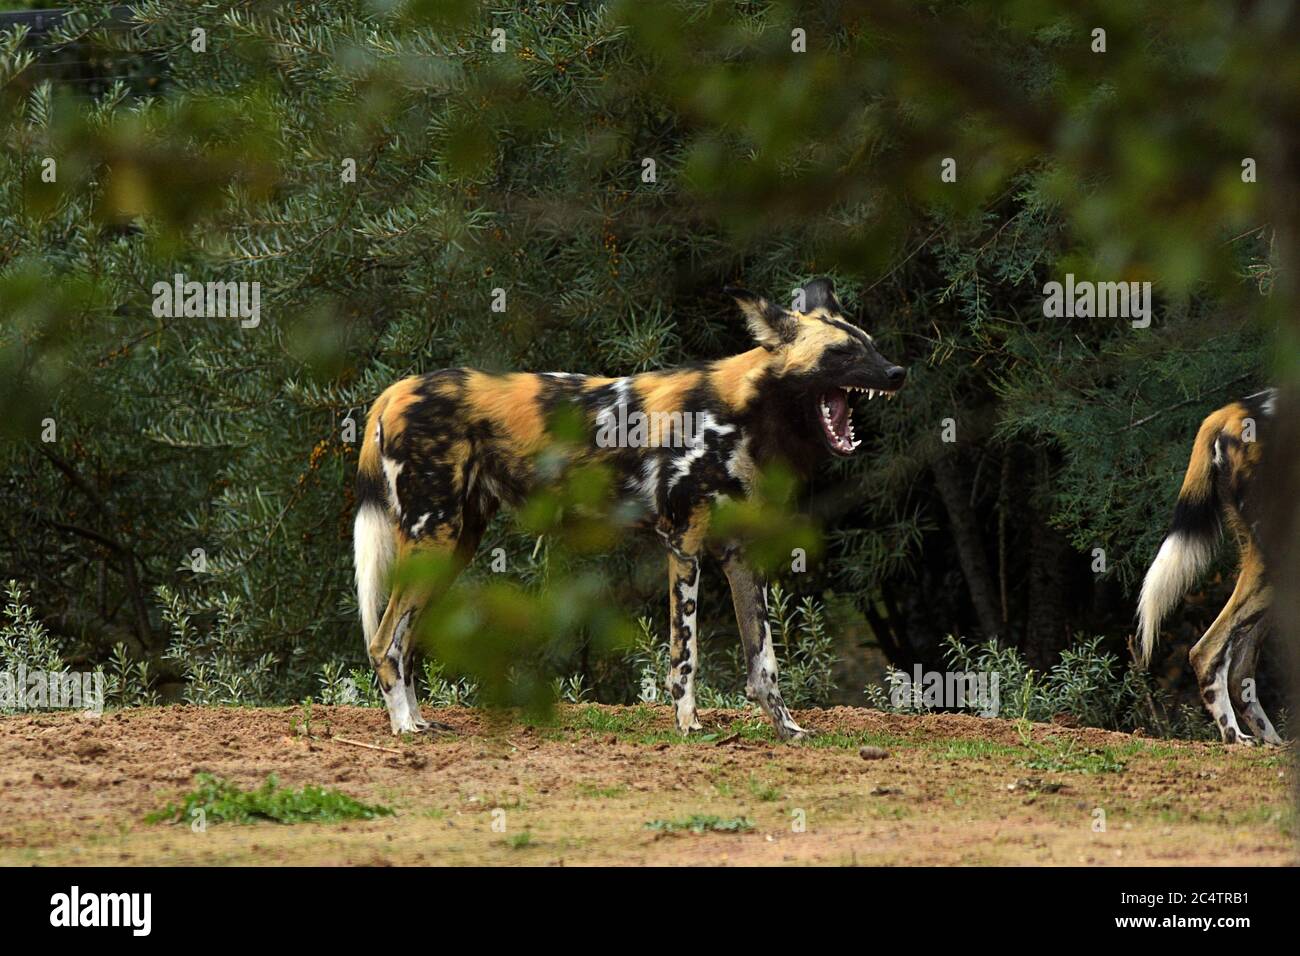 African Wild Dogs on display at Chester Zoo. In the wild this endangered species hunts antelope and other prey in the sub-Sahara regions of Africa.. Stock Photo